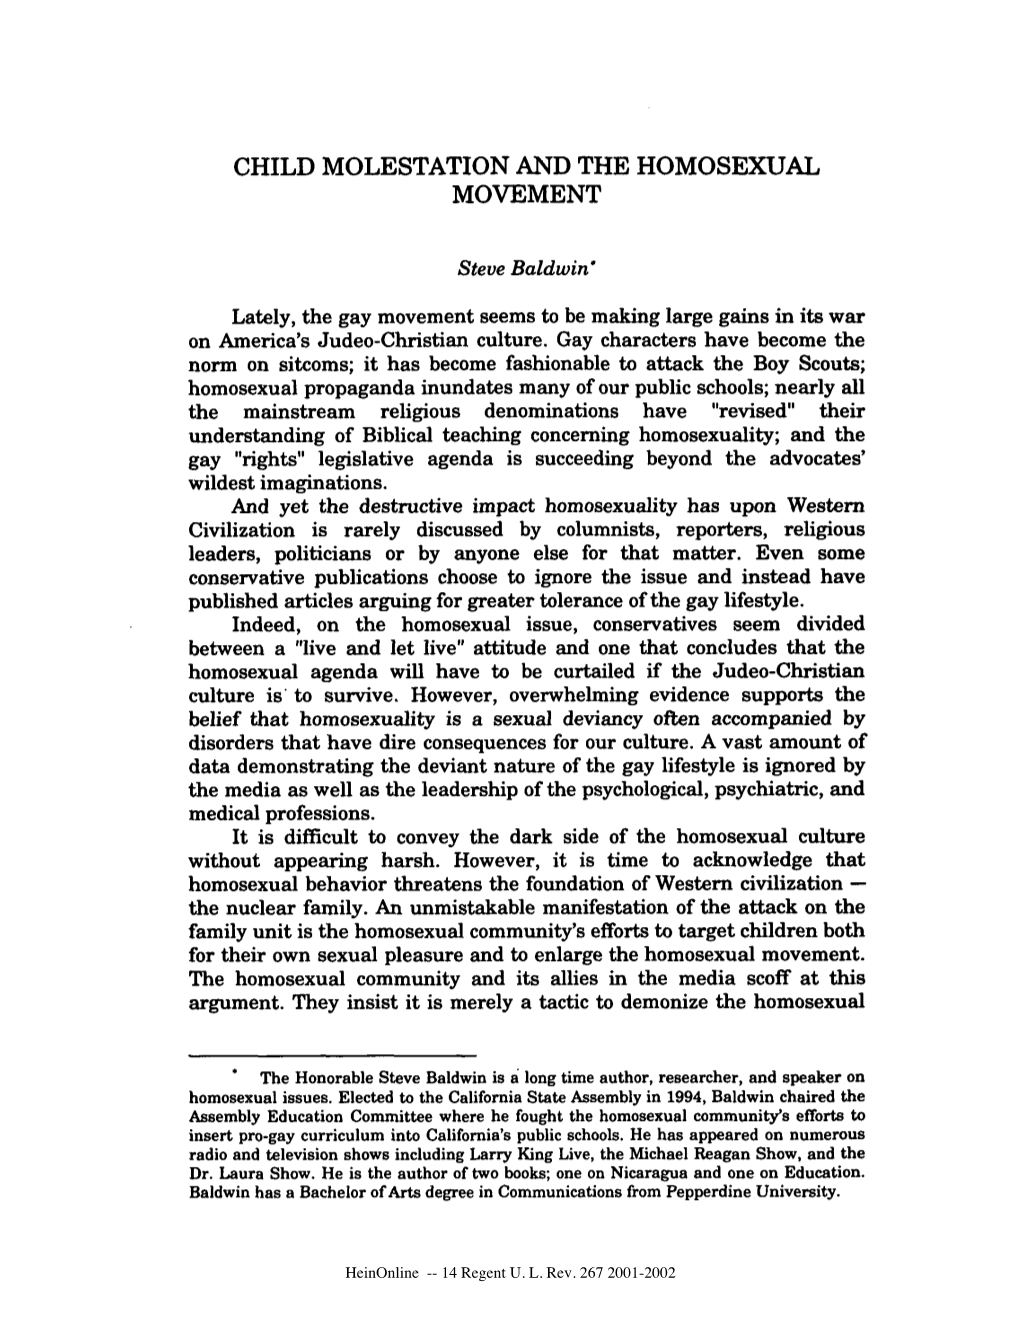 Child Molestation and the Homosexual Movement